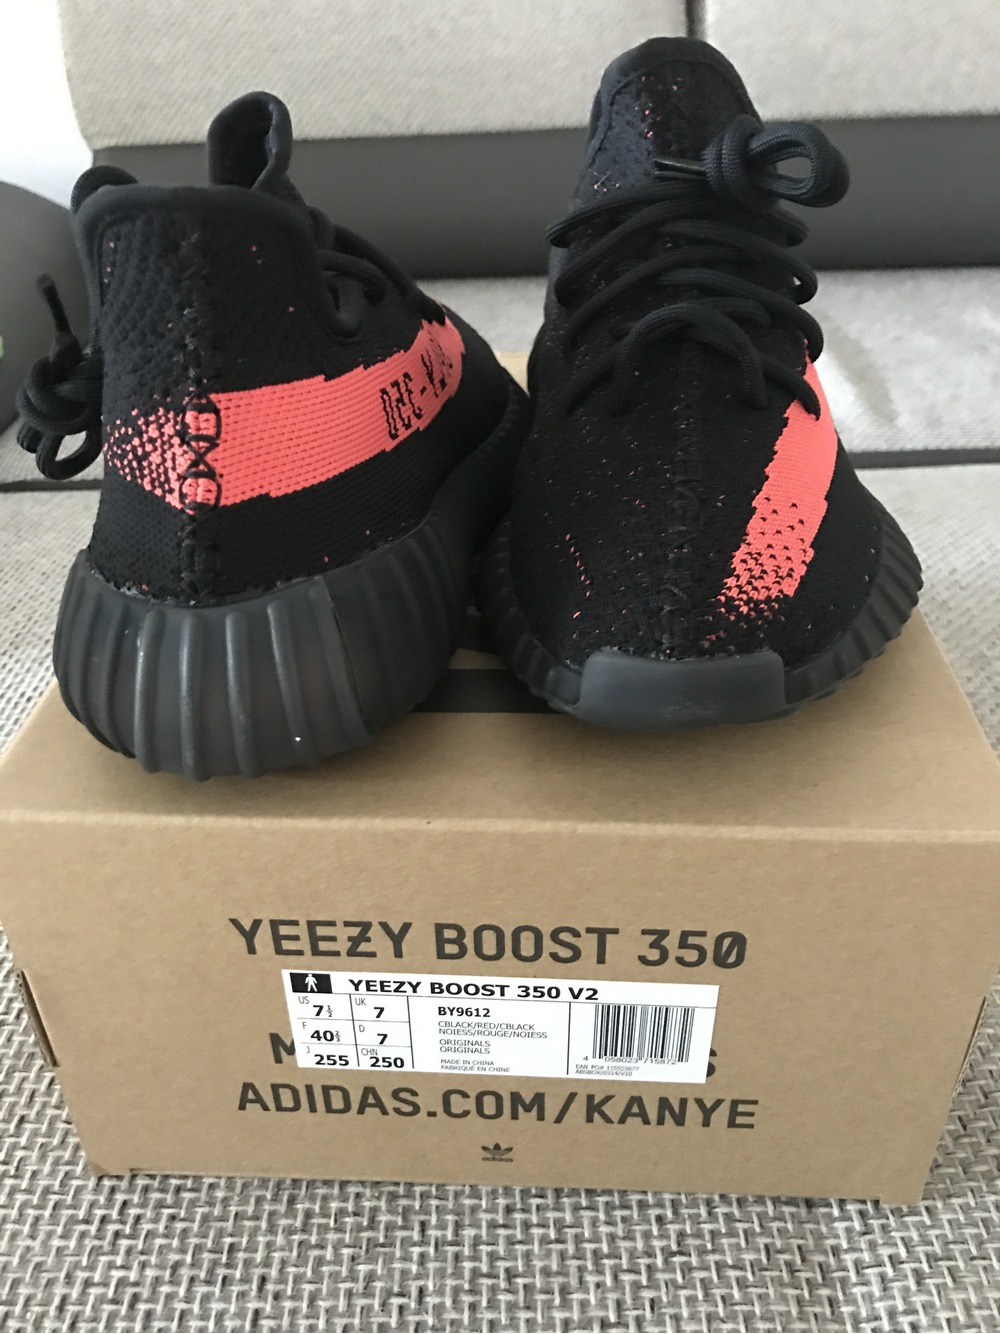 BY 9612 350 SPLY v2 'Black Red' perfect Version with real boost